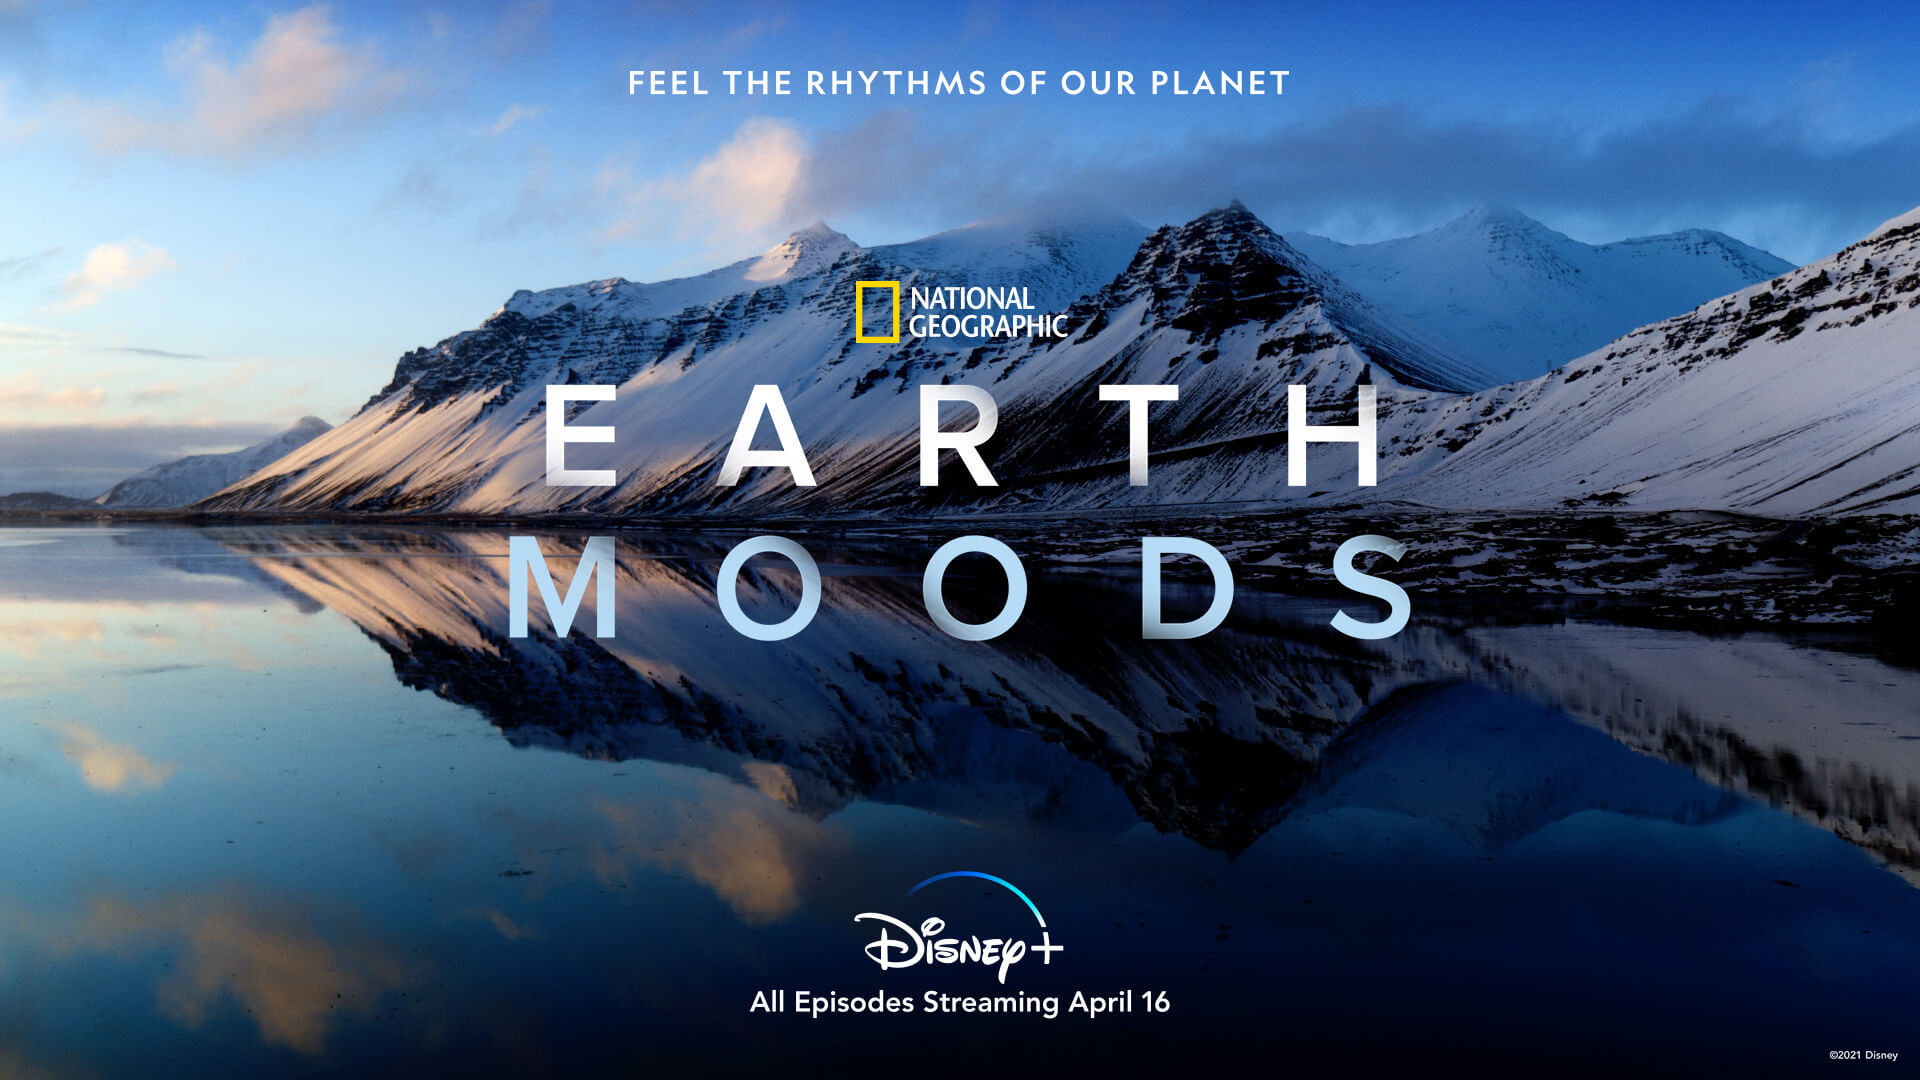 Disney+ Reveals First Look at ‘Earth Moods’ From National Geographic